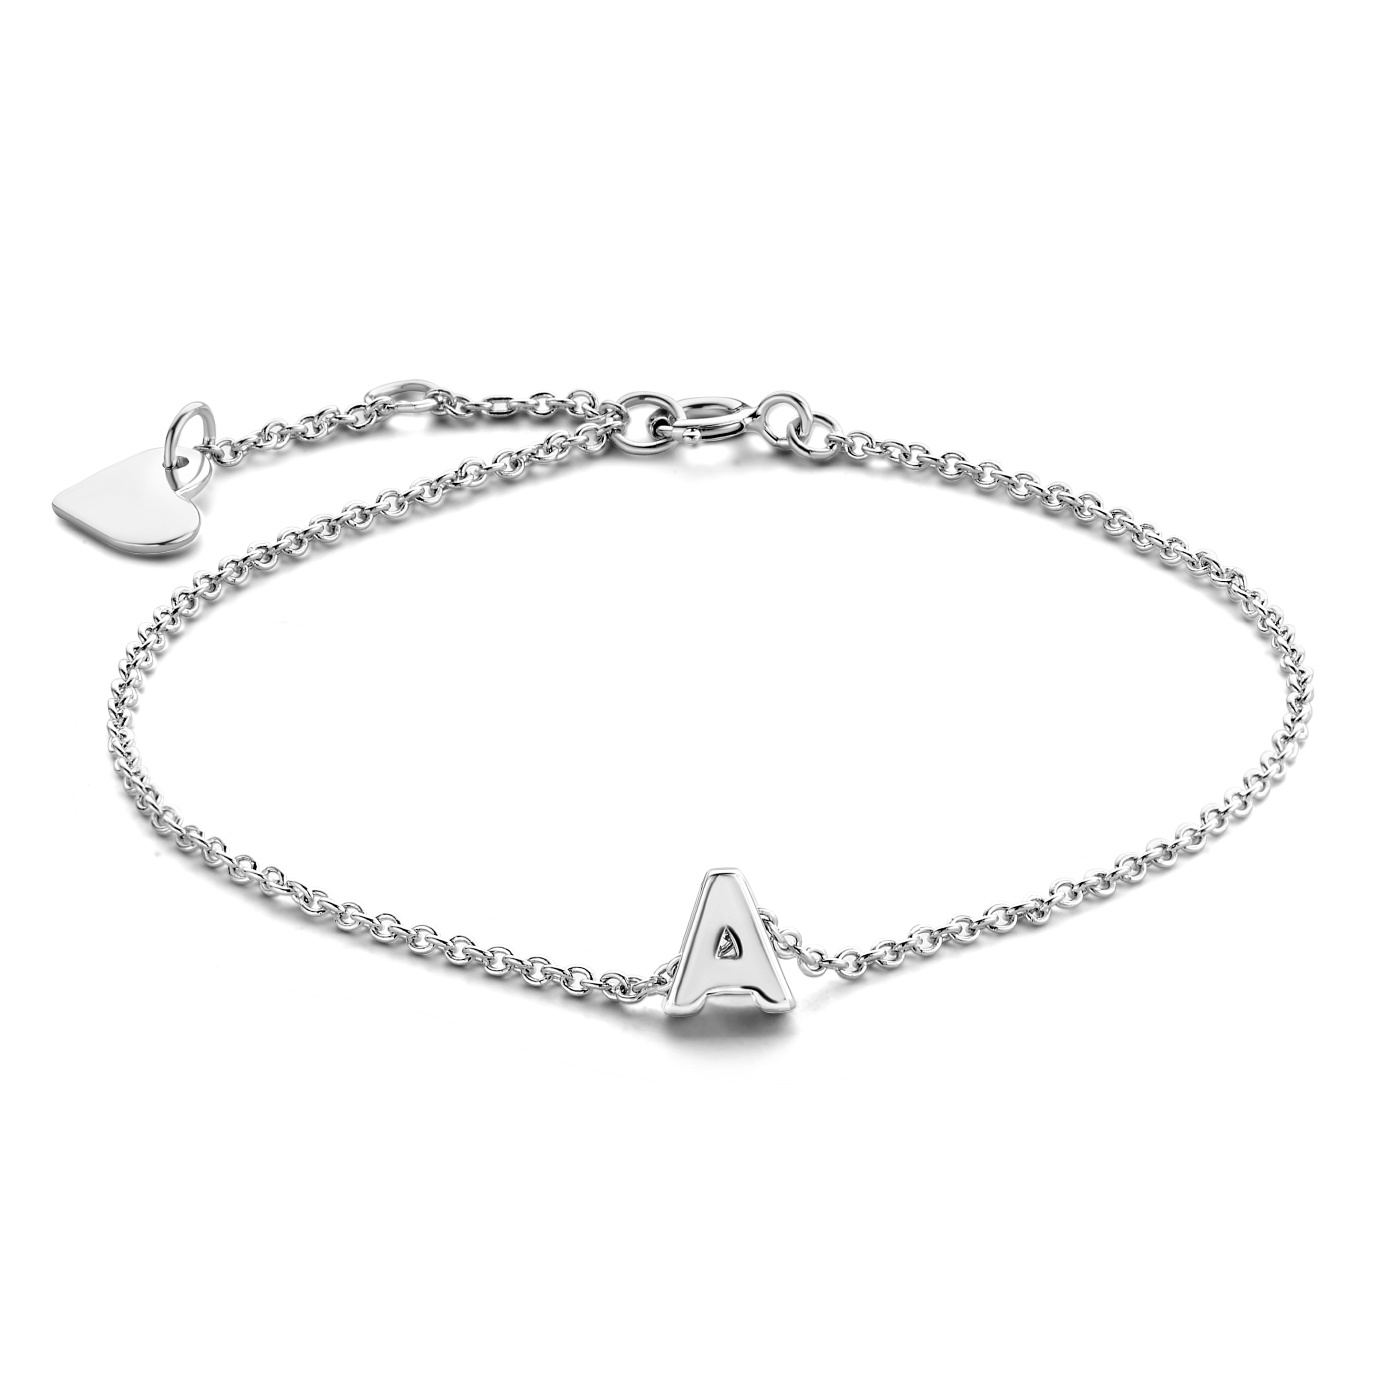 Selected Jewels Julie Armband Silber Sterling Initiale Céleste 925